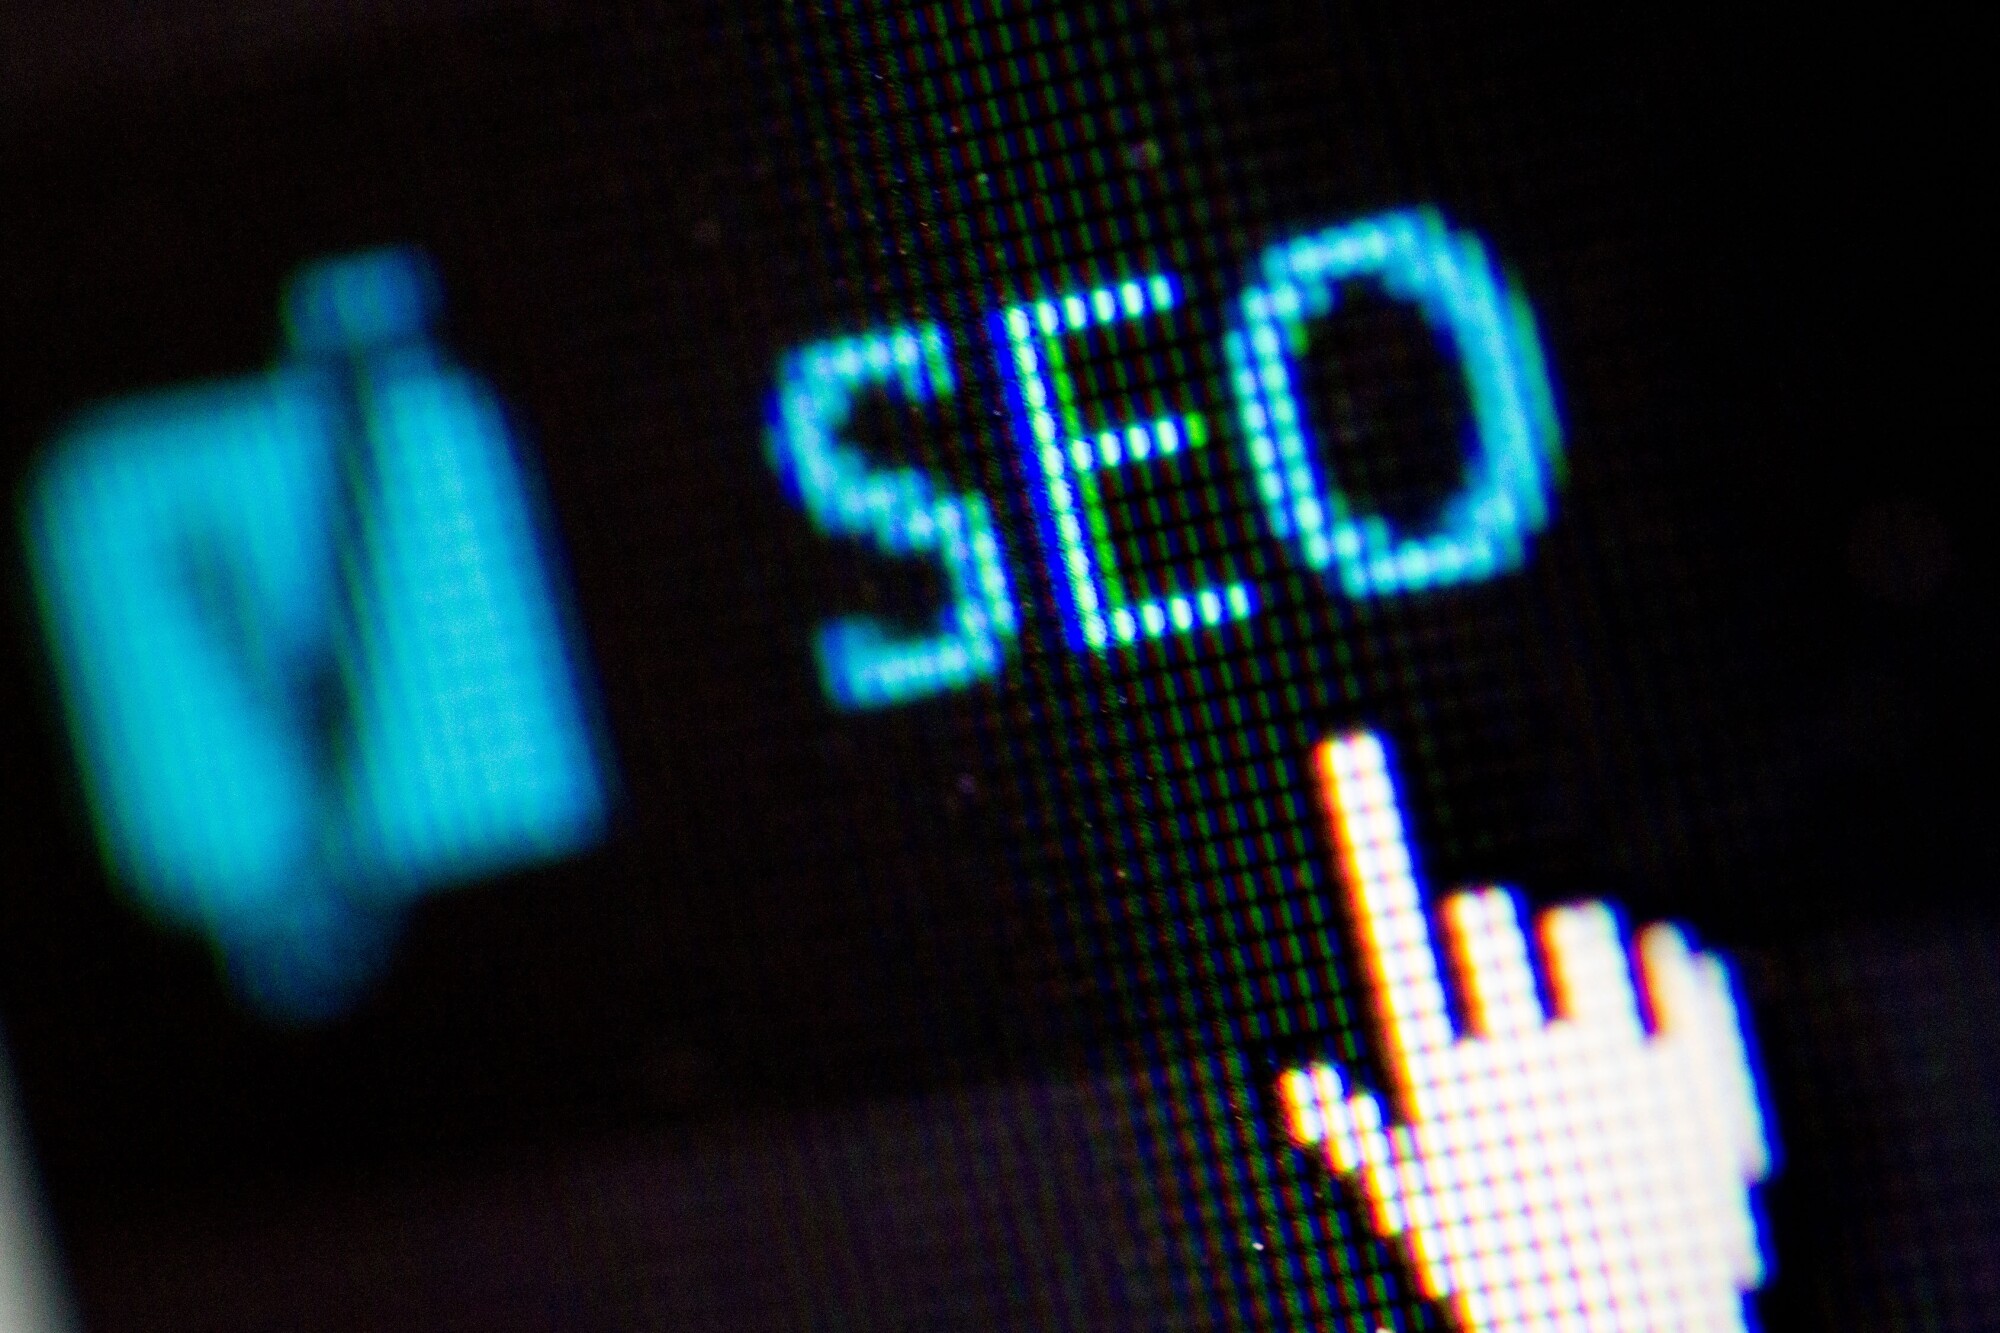 SEO for Small Businesses: 5 Budget-Friendly Tips